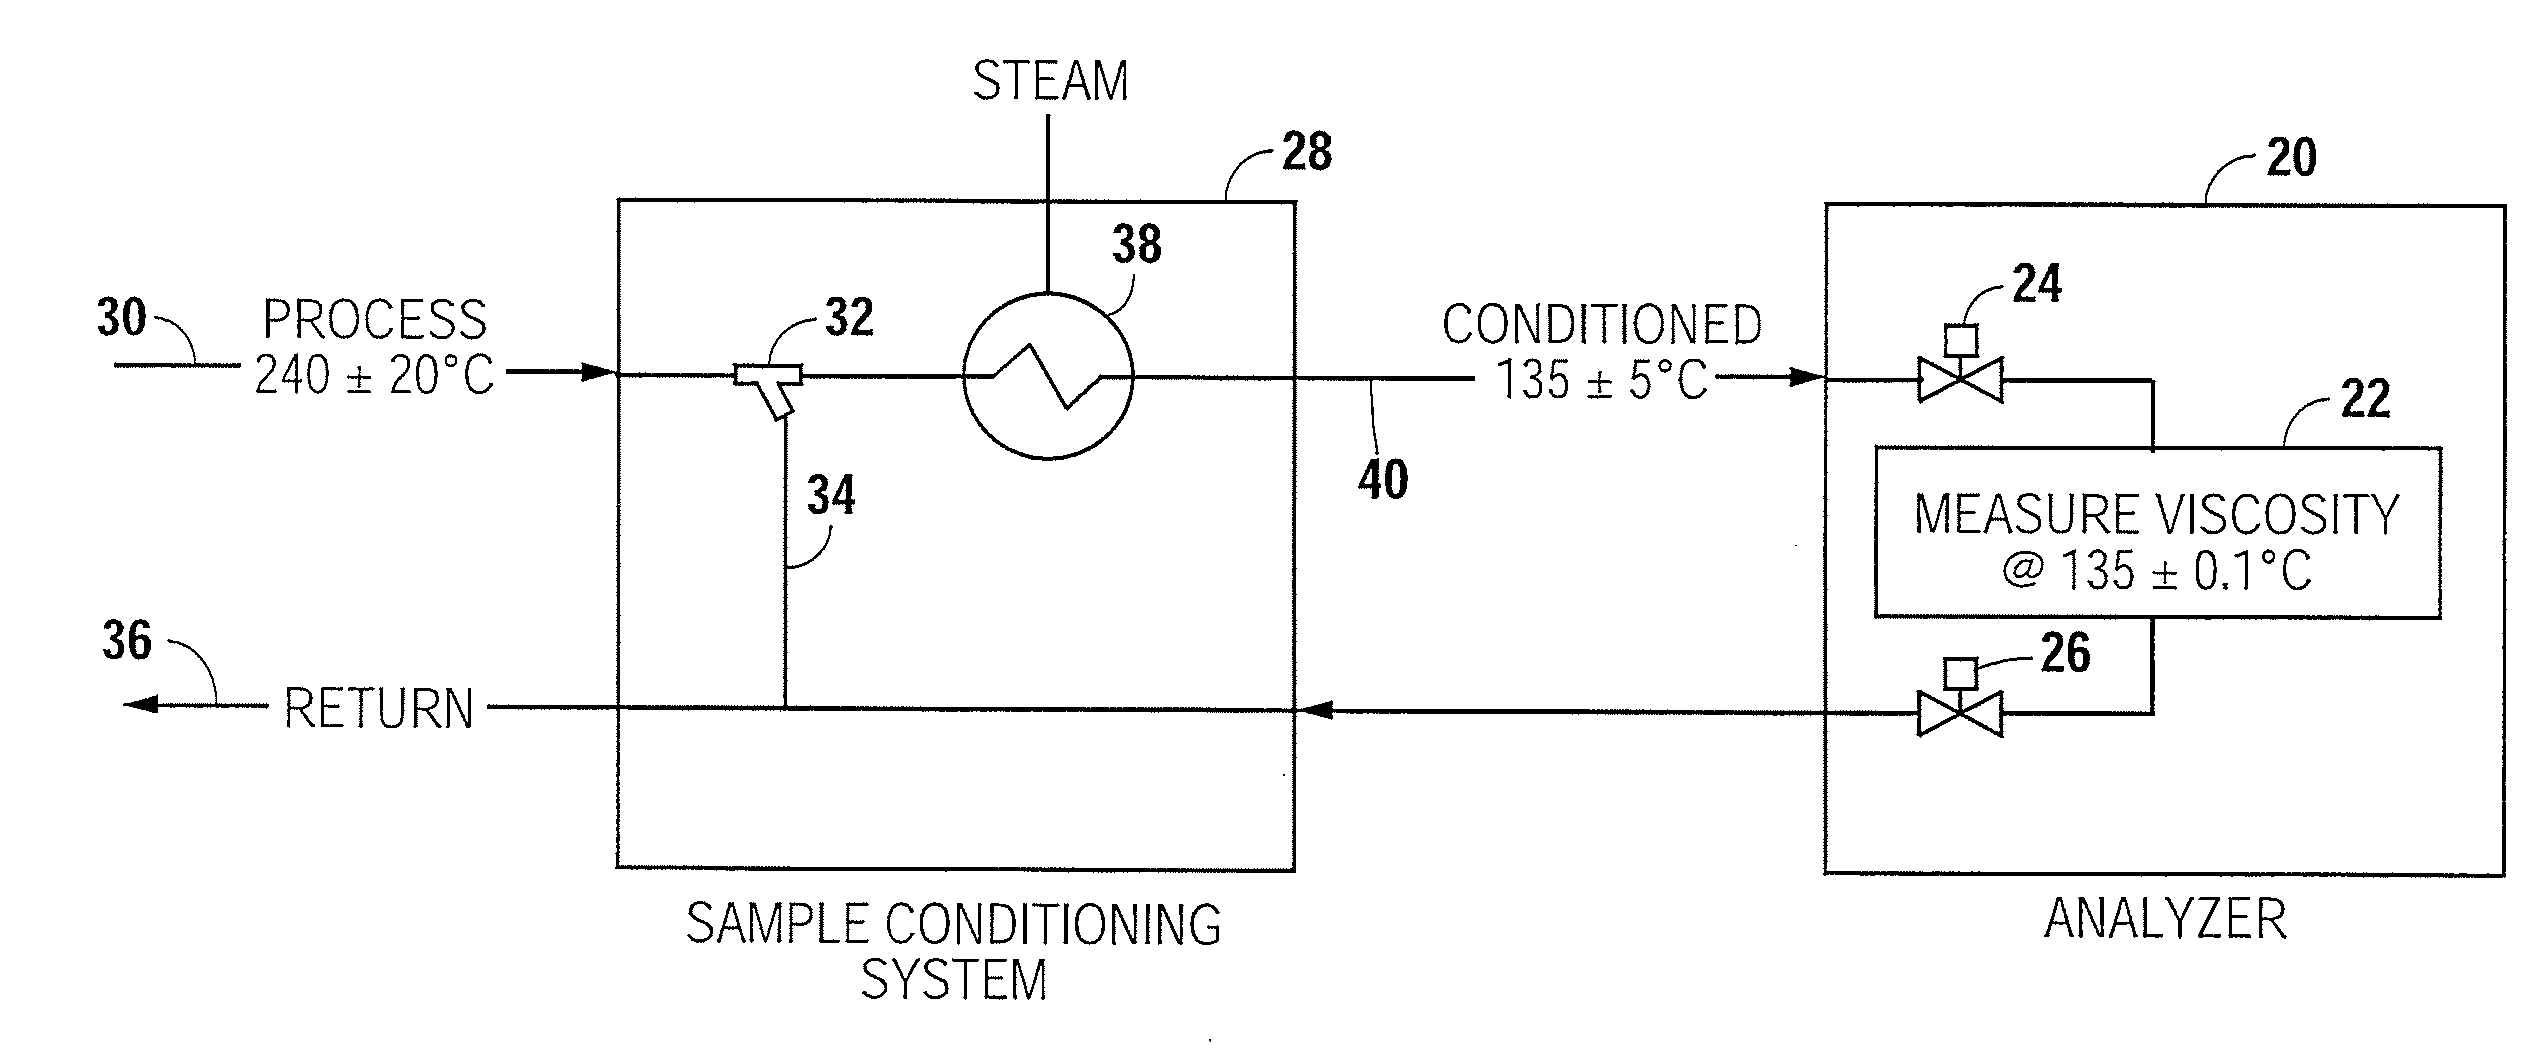 Method and apparatus for measuring characteristics of a heated fluid in a hostile environment